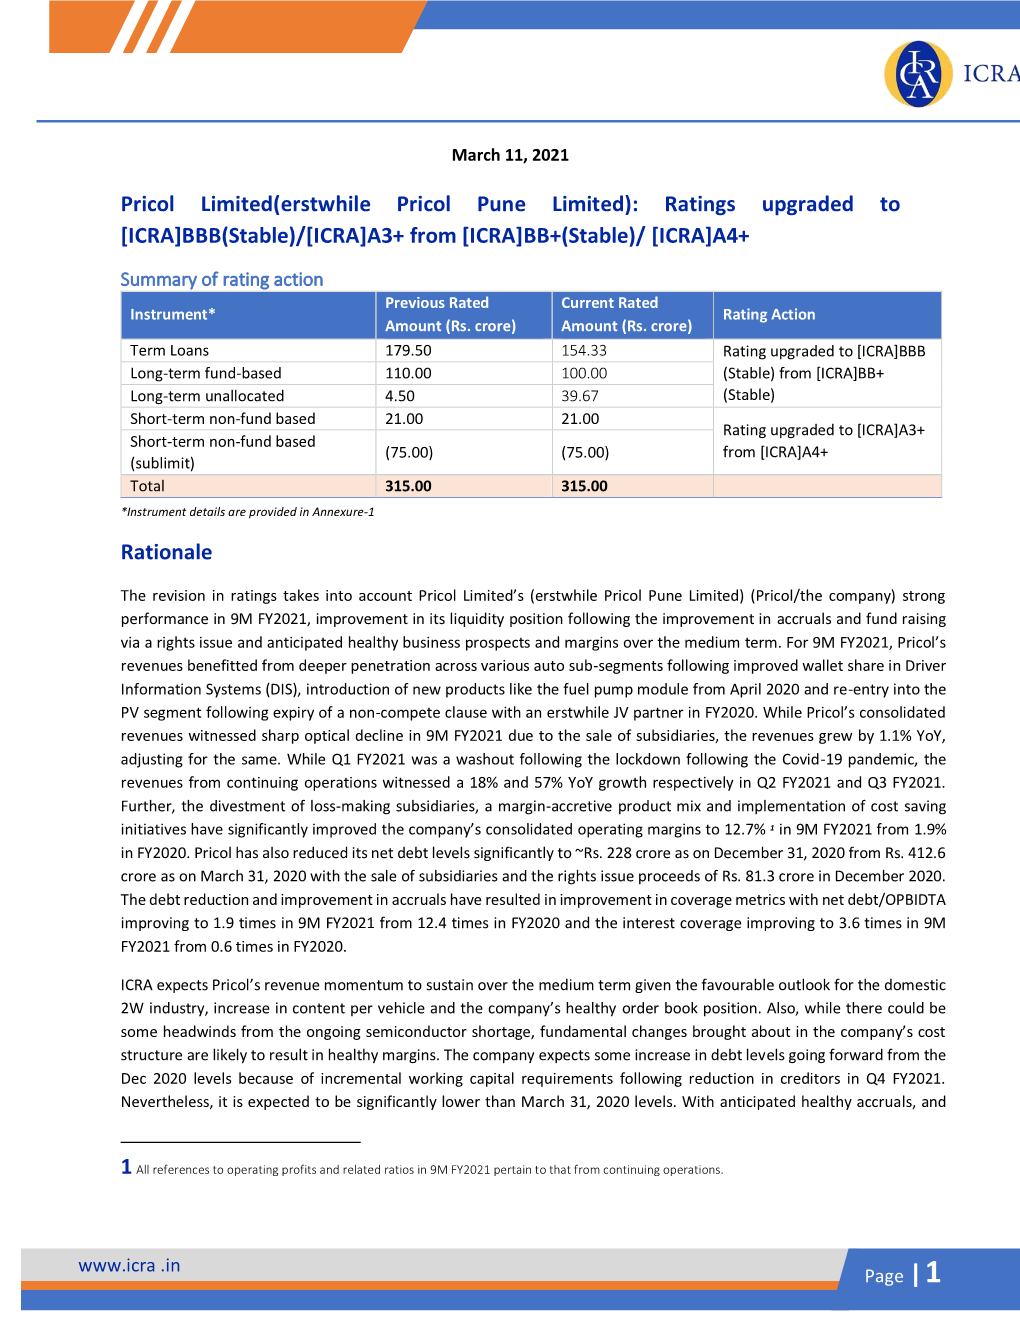 Pricol Limited(Erstwhile Pricol Pune Limited): Ratings Upgraded to [ICRA]BBB(Stable)/[ICRA]A3+ from [ICRA]BB+(Stable)/ [ICRA]A4+